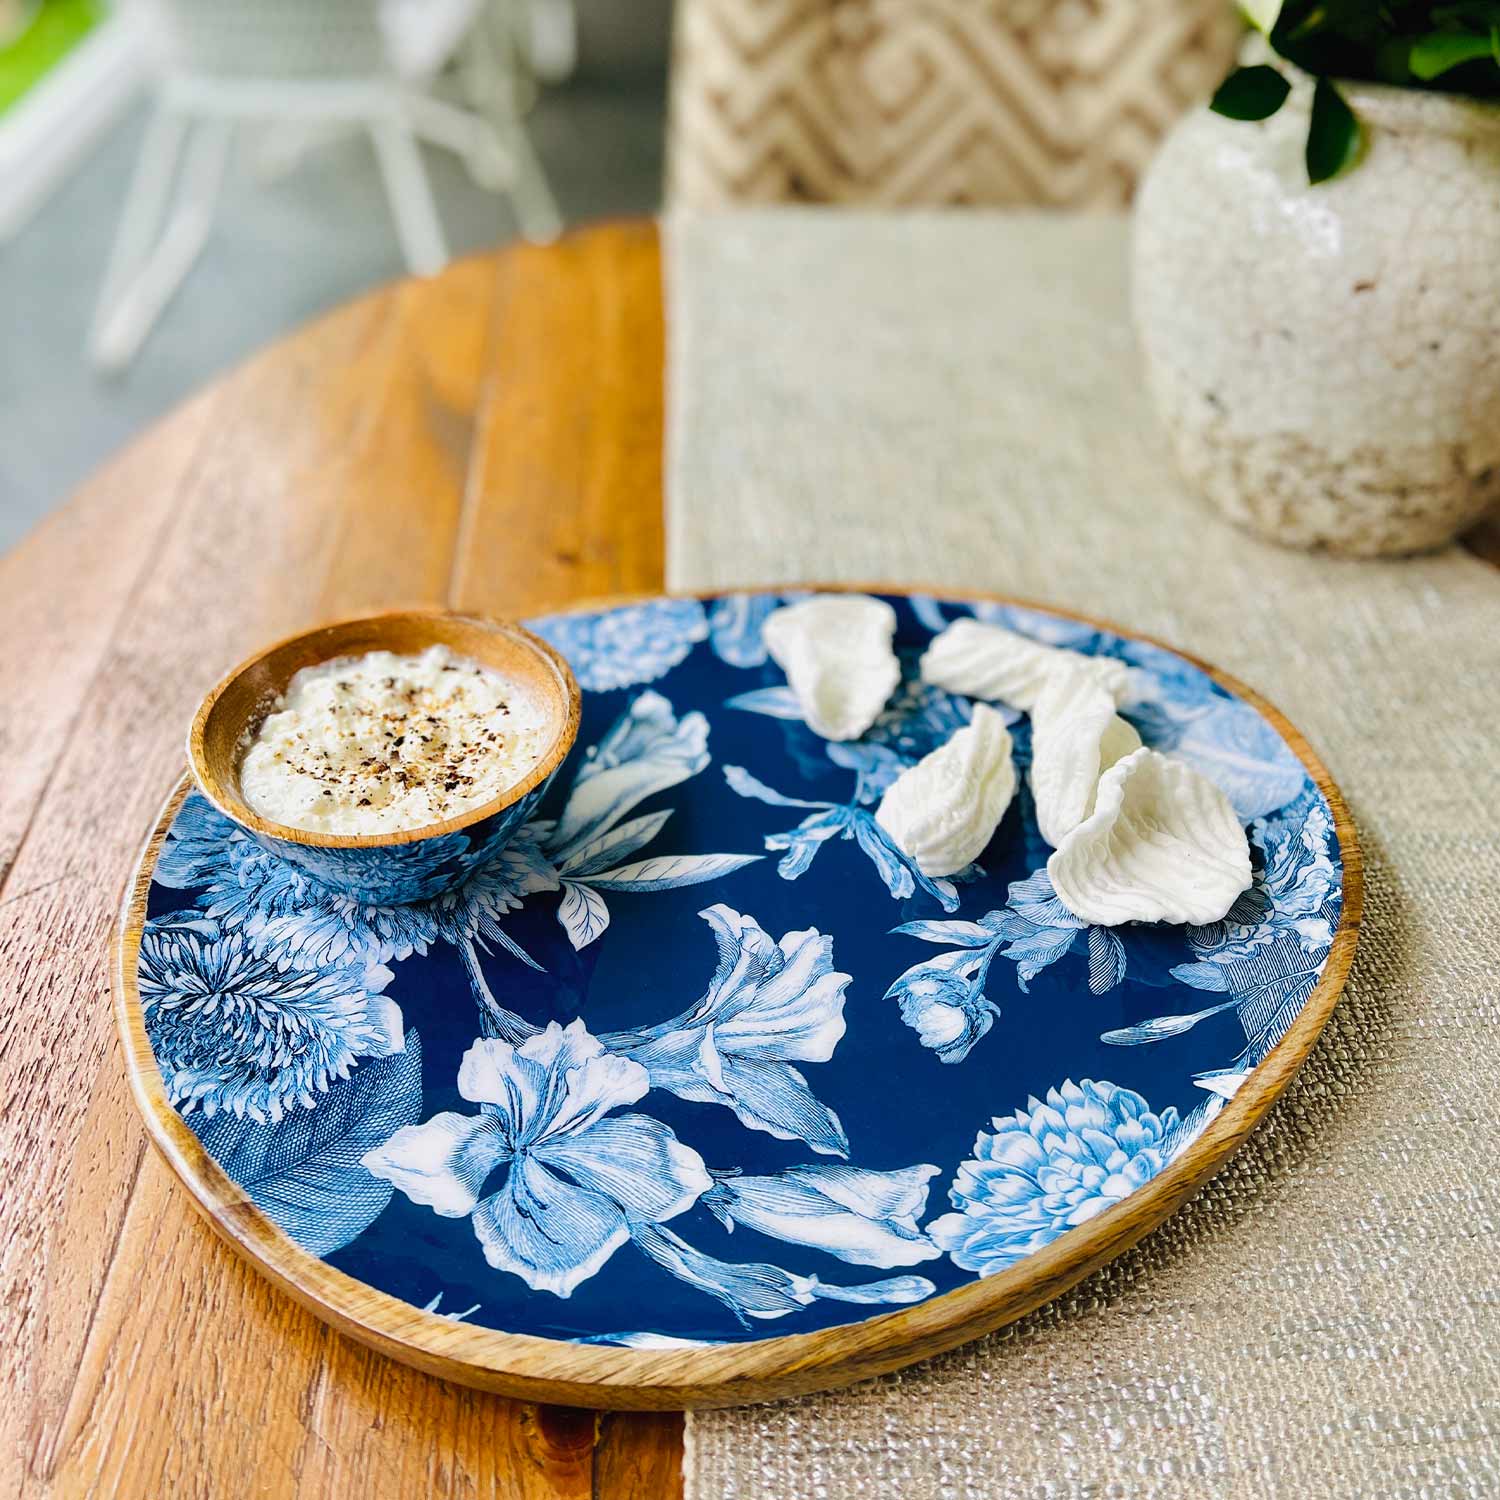 Large Oval Platter with Dip Bowl - Brittany Bleu